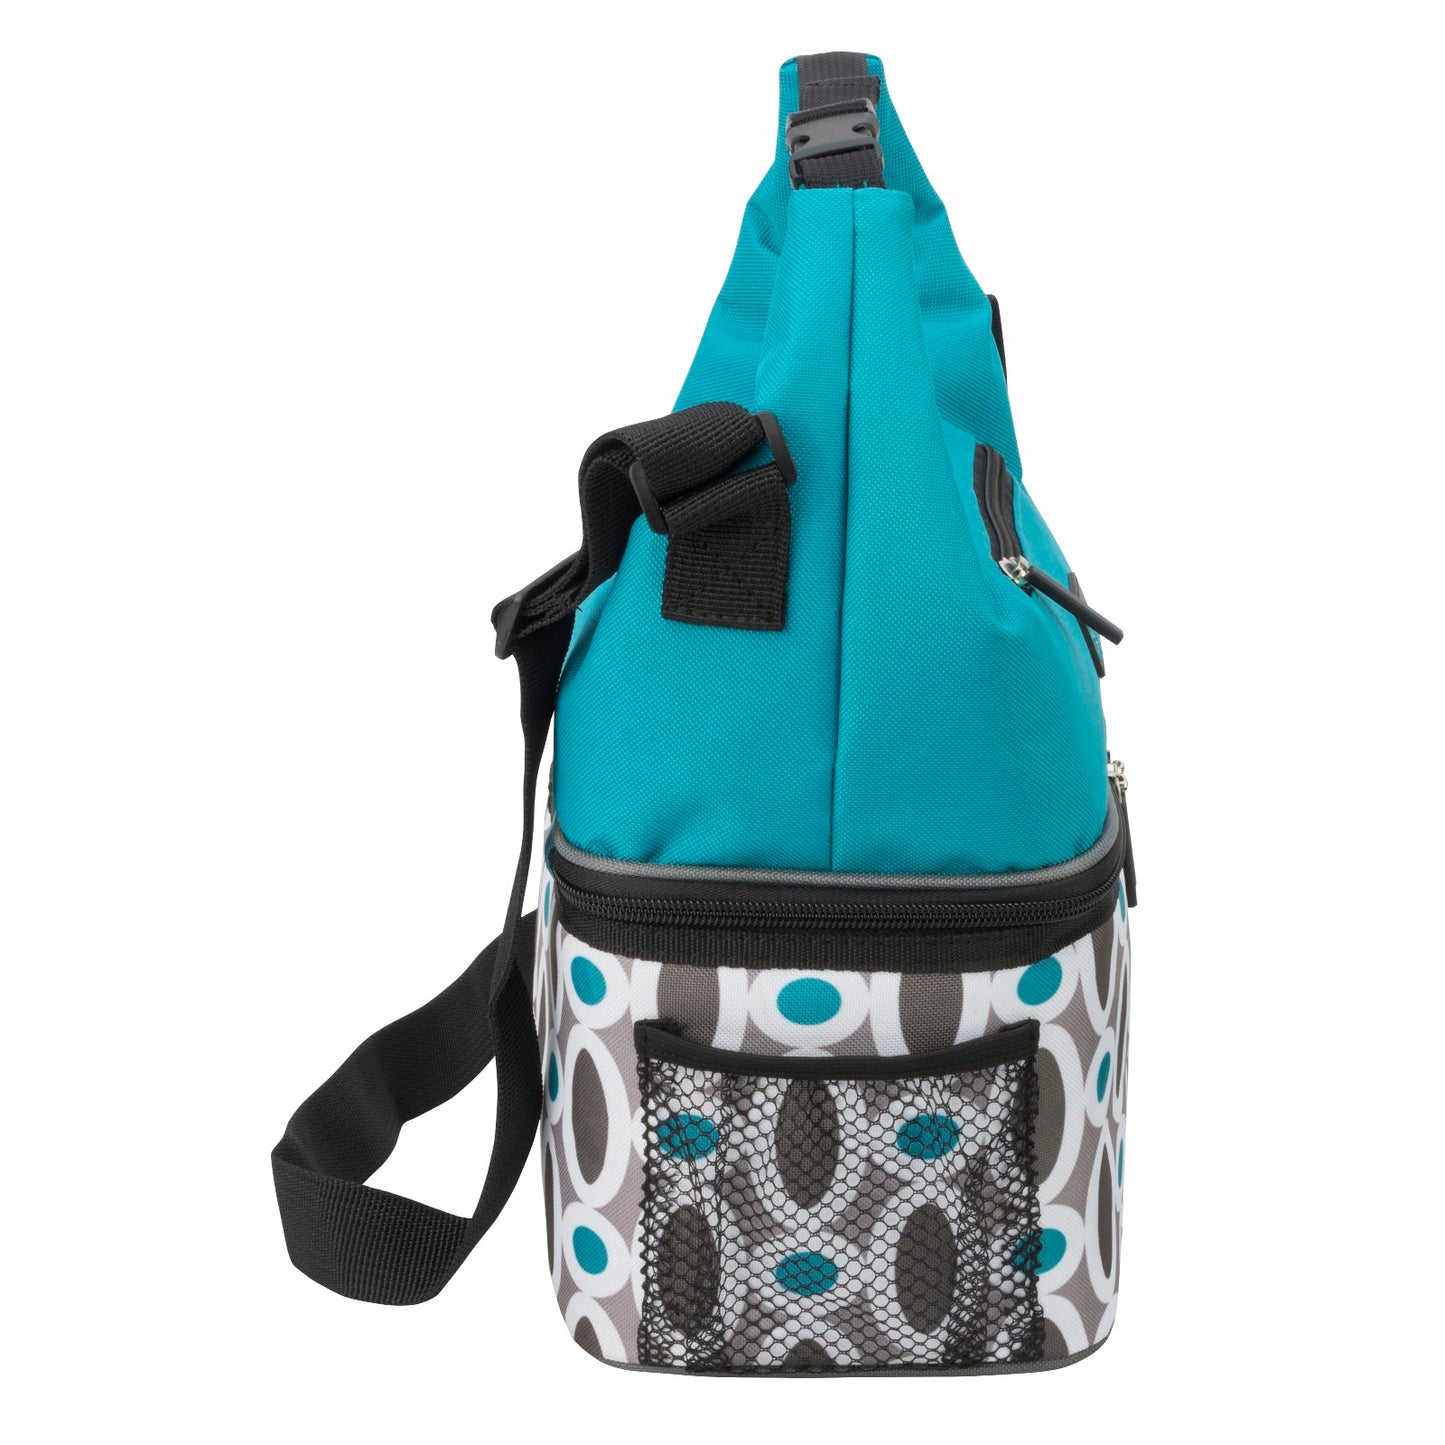 Compact Lunch Cooler - 2 Insulated Compartments - Modern Links Pattern